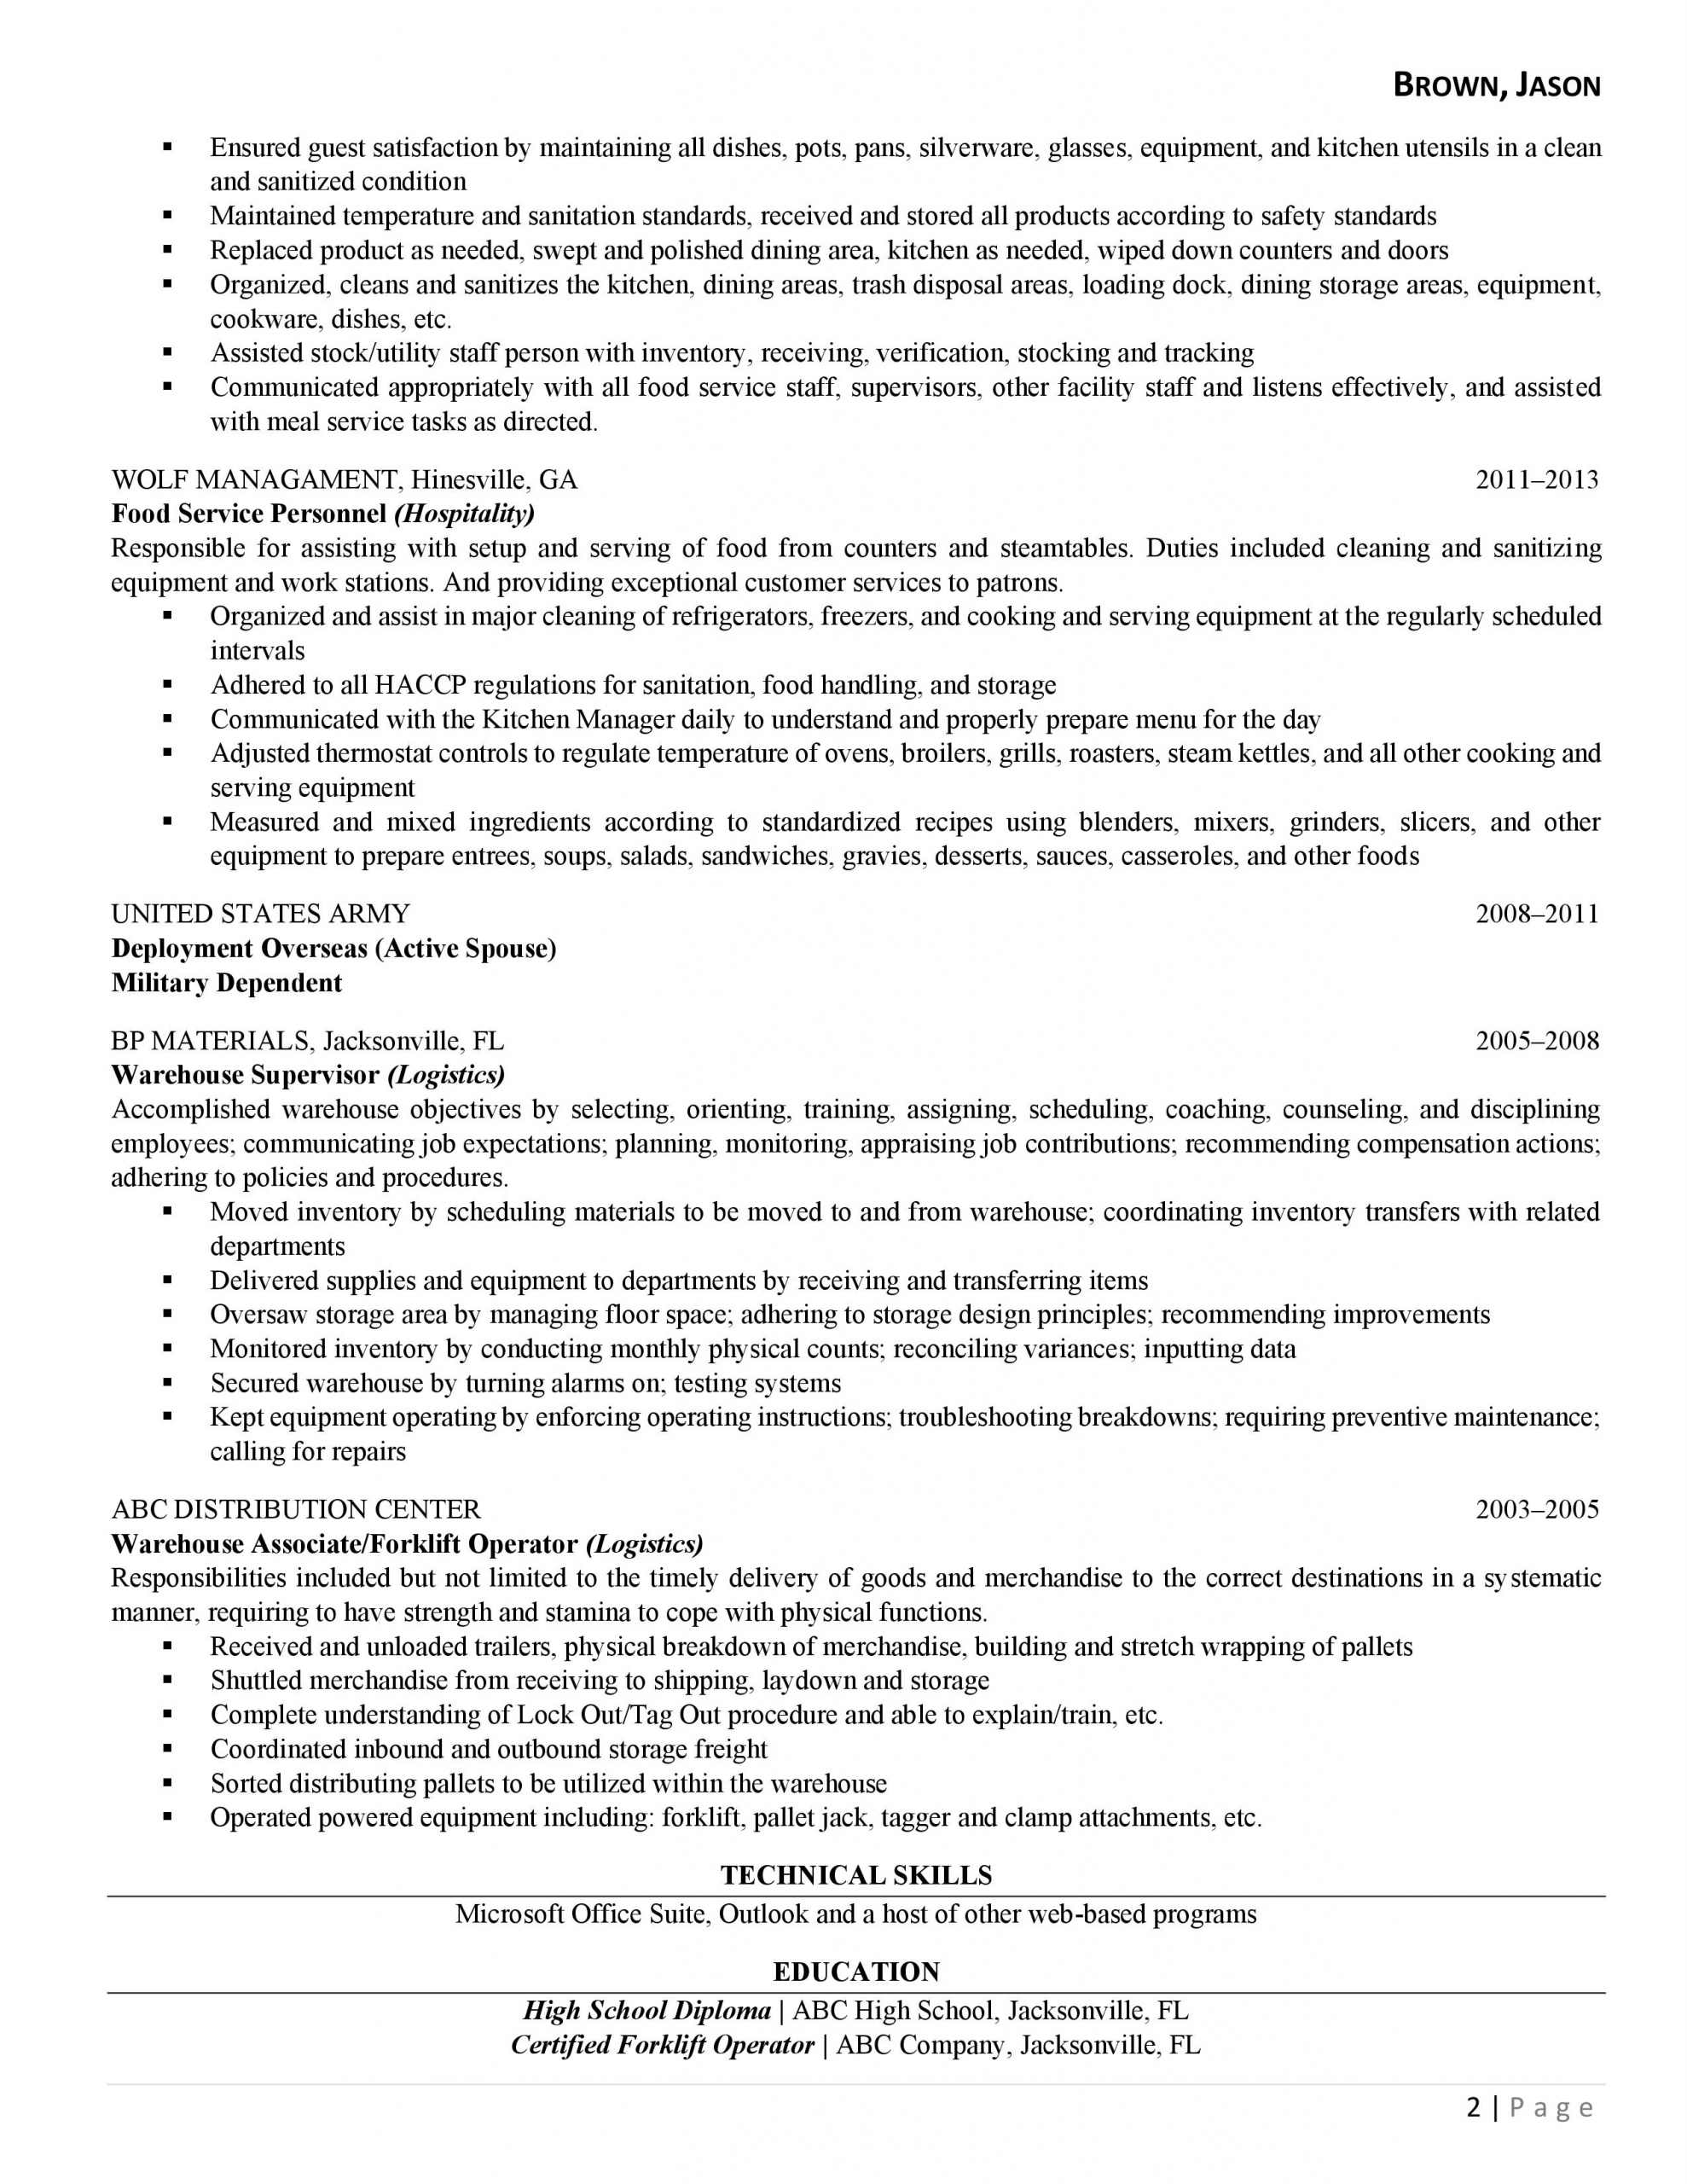 How To Write A Narrative Resume: Page 2 Of A Traditional Resume Example